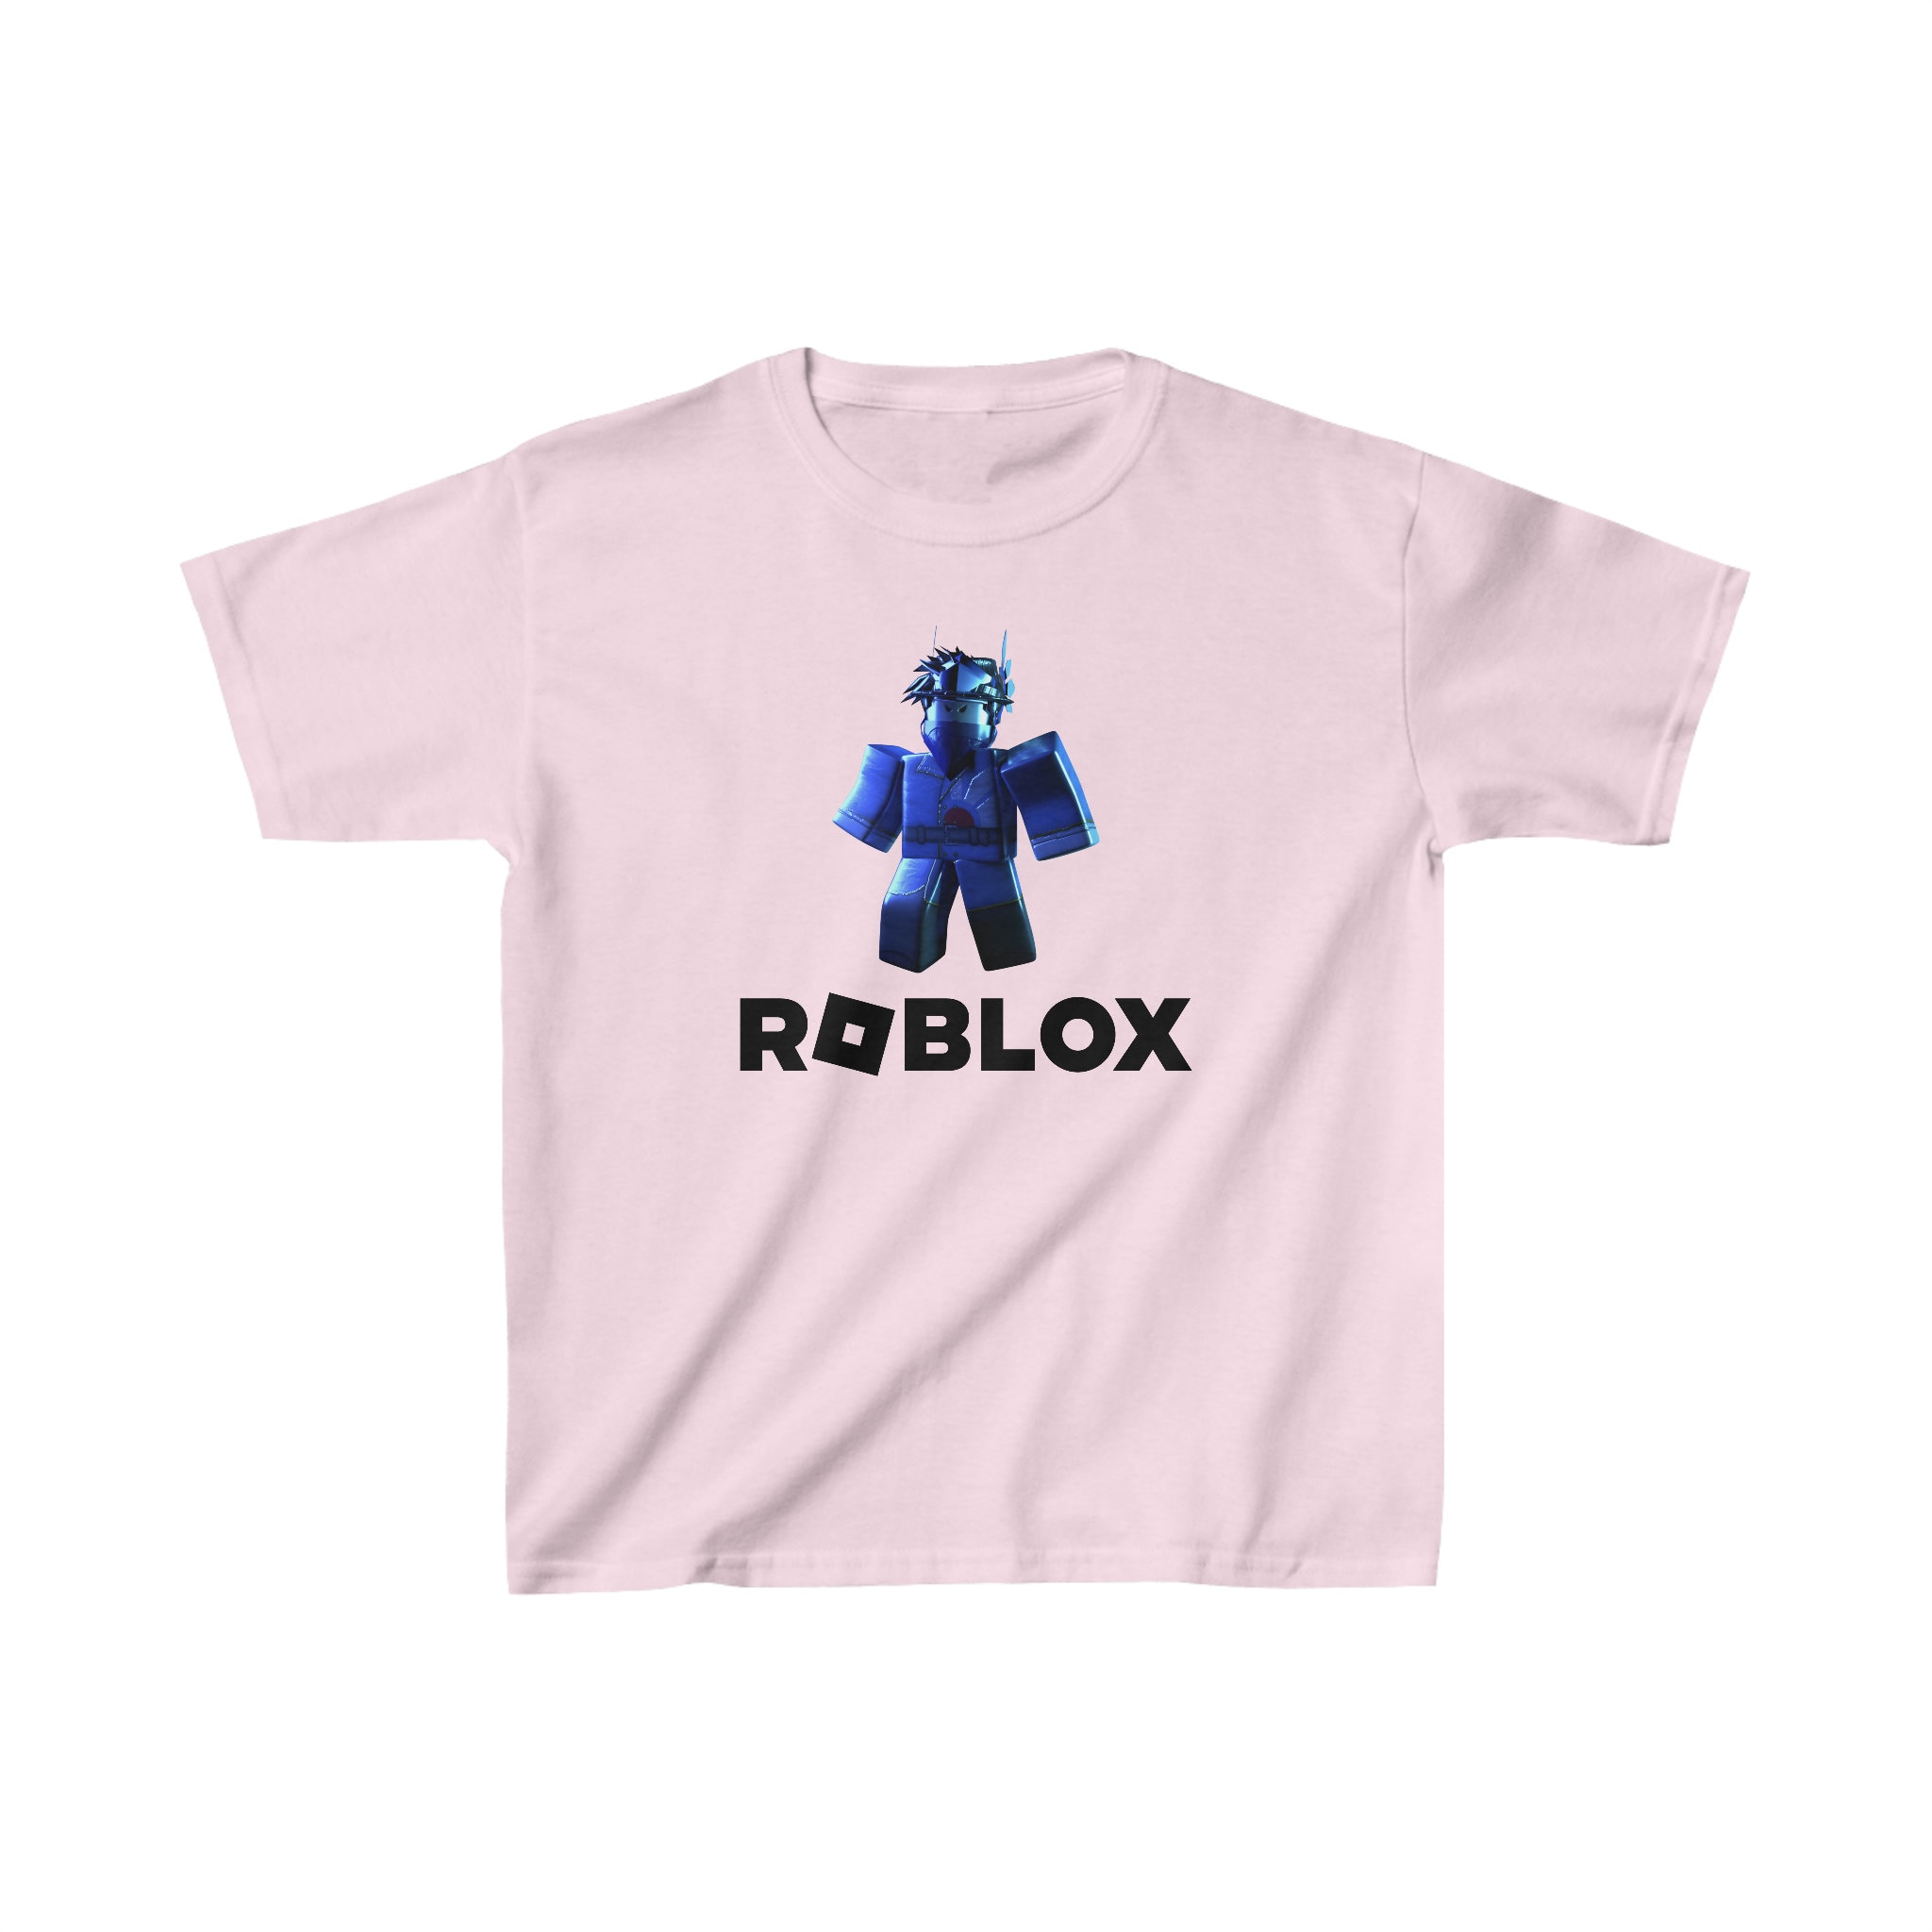 X 上的Zoe：「Need free t-shirts? make your own! Search Roblox t